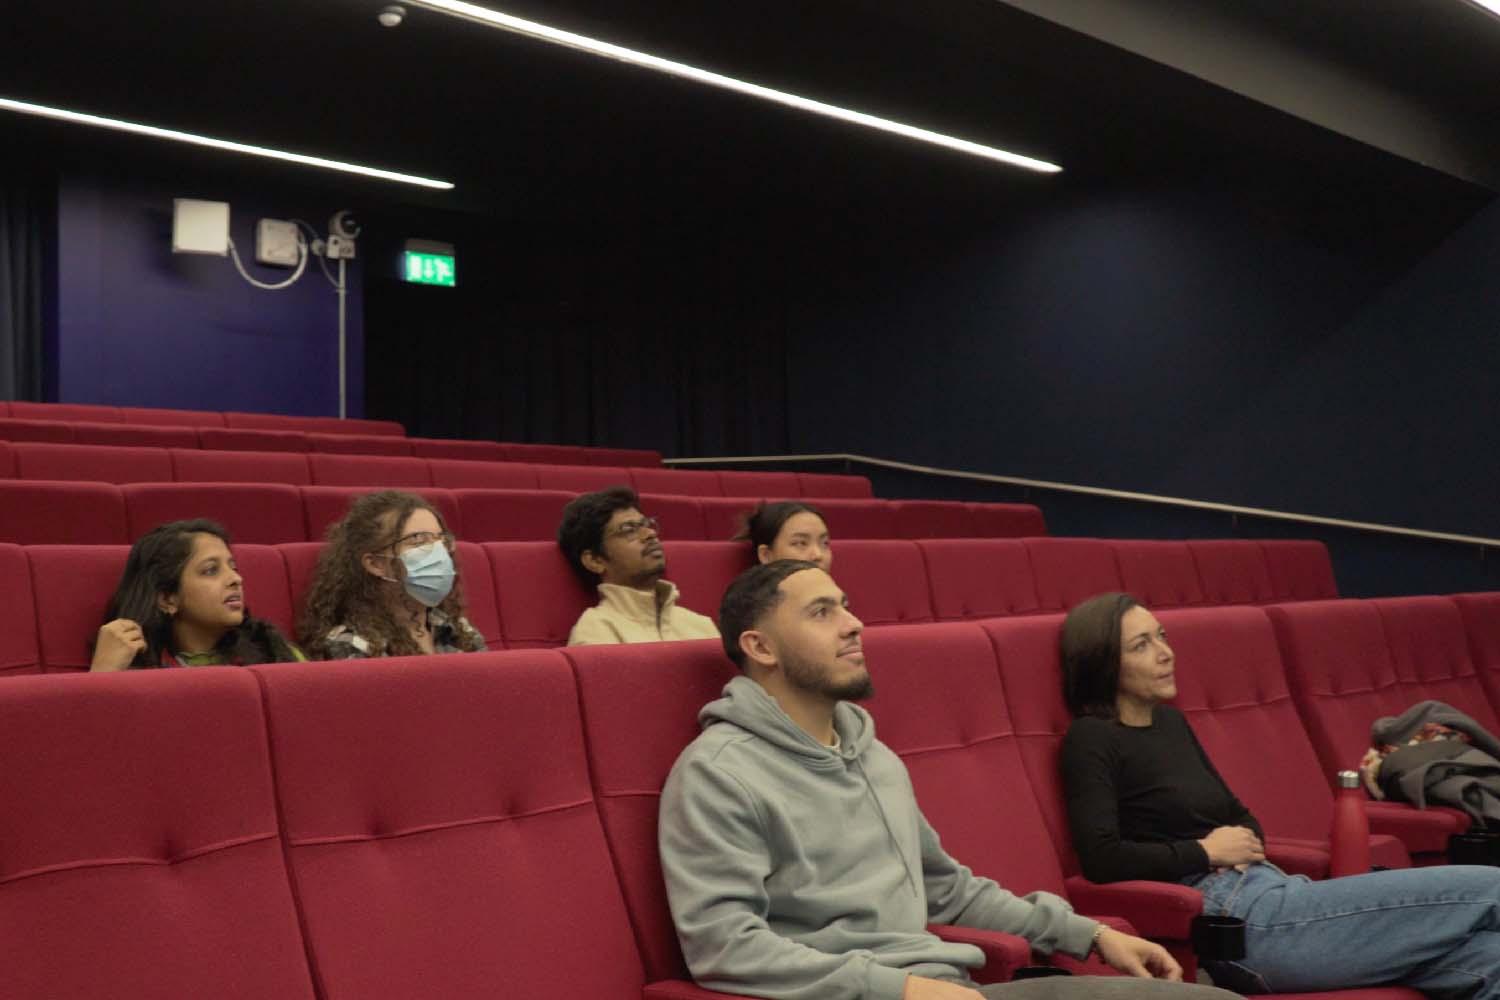 students watching in the cinema room